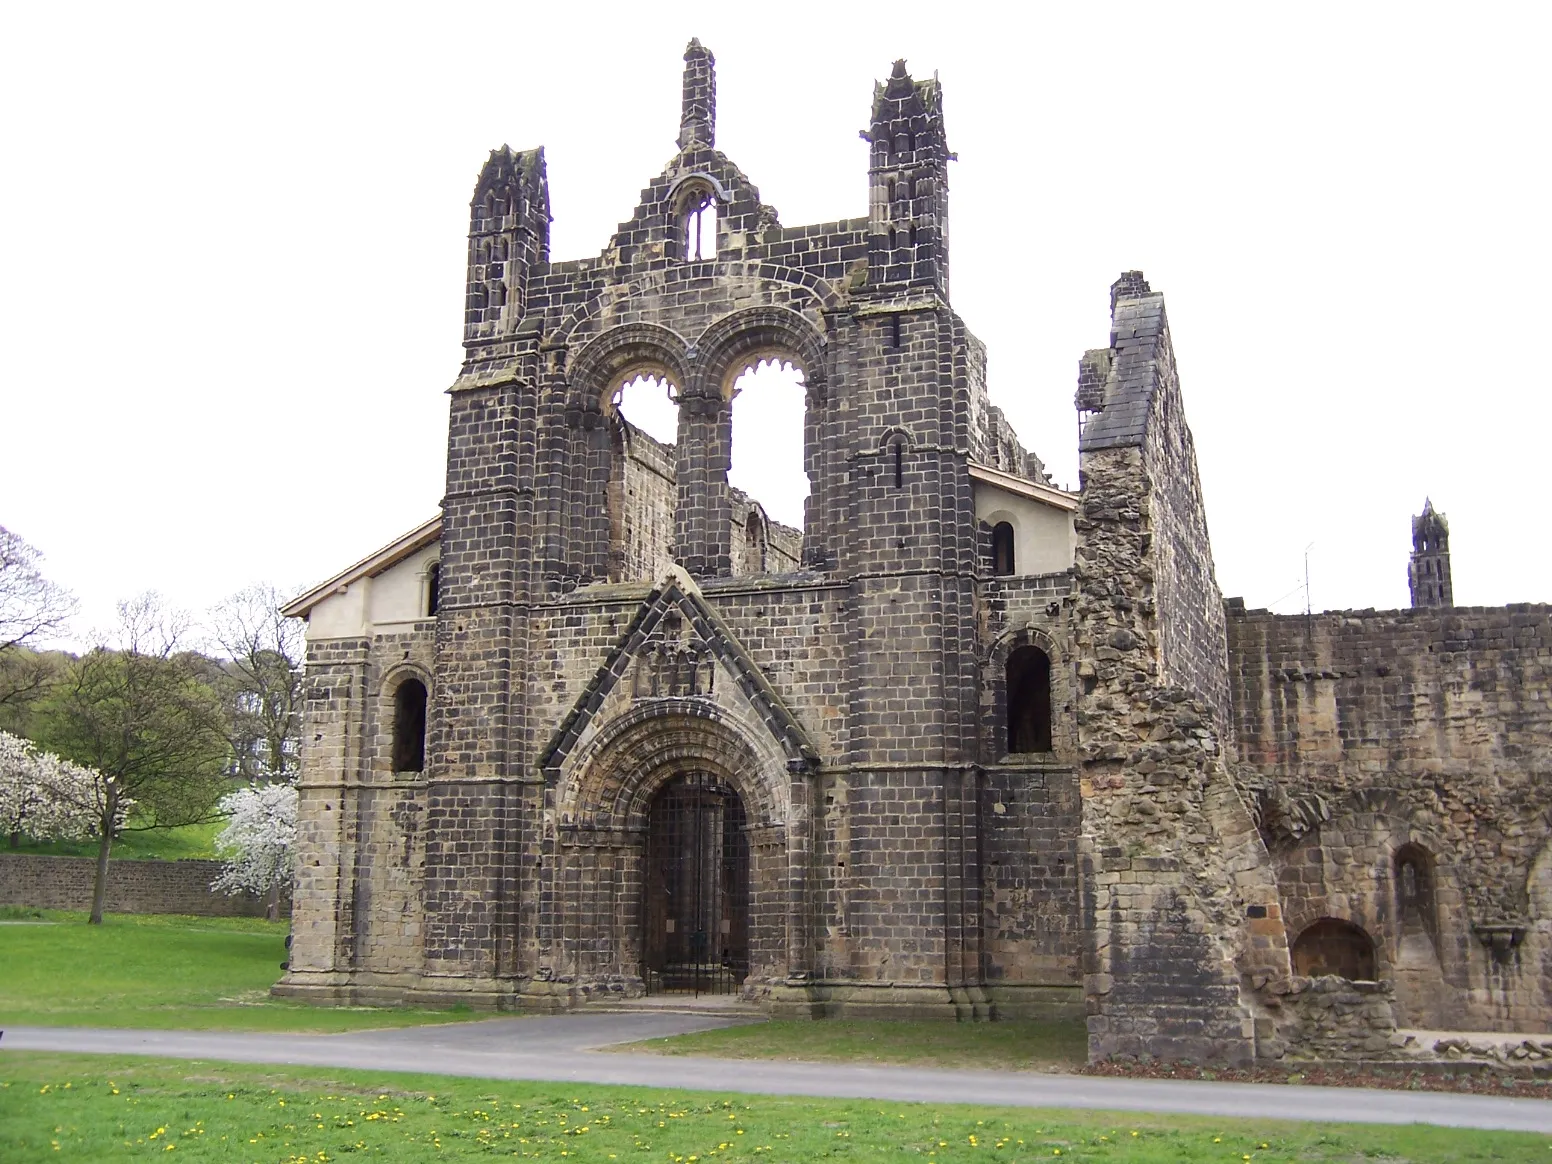 Photo showing: view of the church of Kirkstall Abbey in Leeds, Yorkshire (England), from the west

own work; photo taken on 30 April 2006